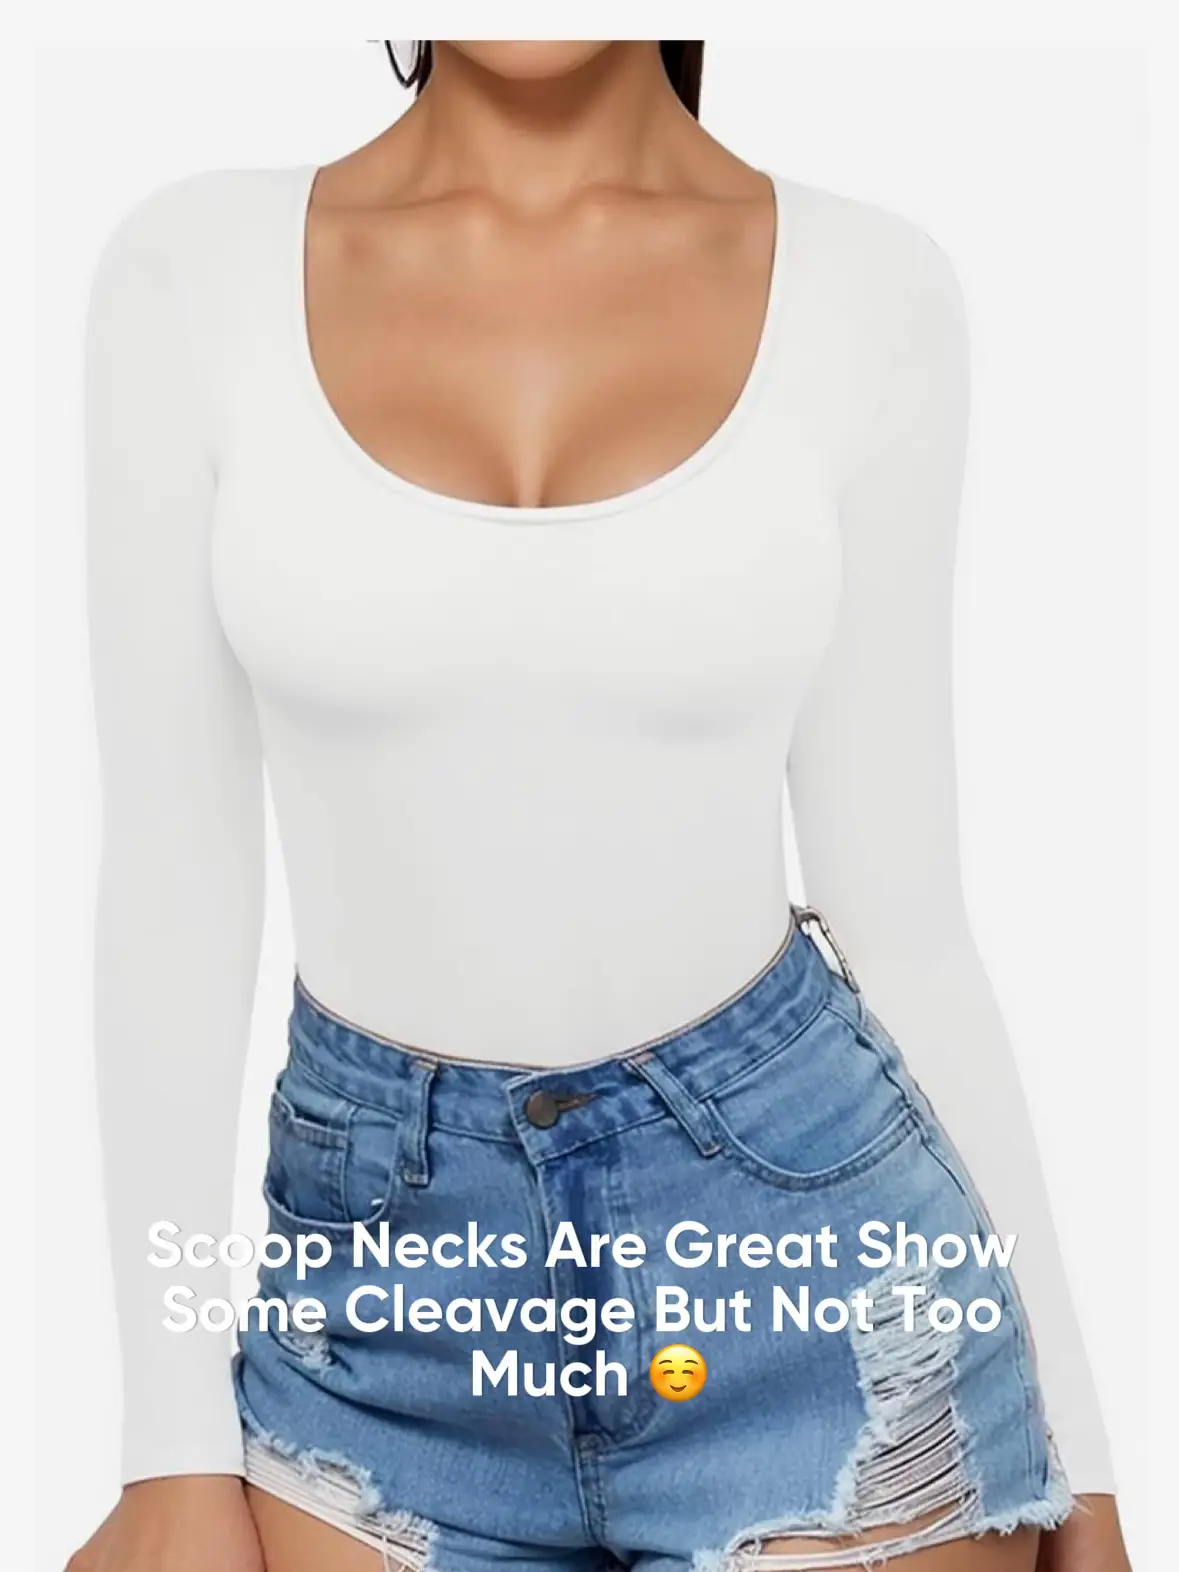 How to wear square neck tops without your bra showing #fashionhacks #s